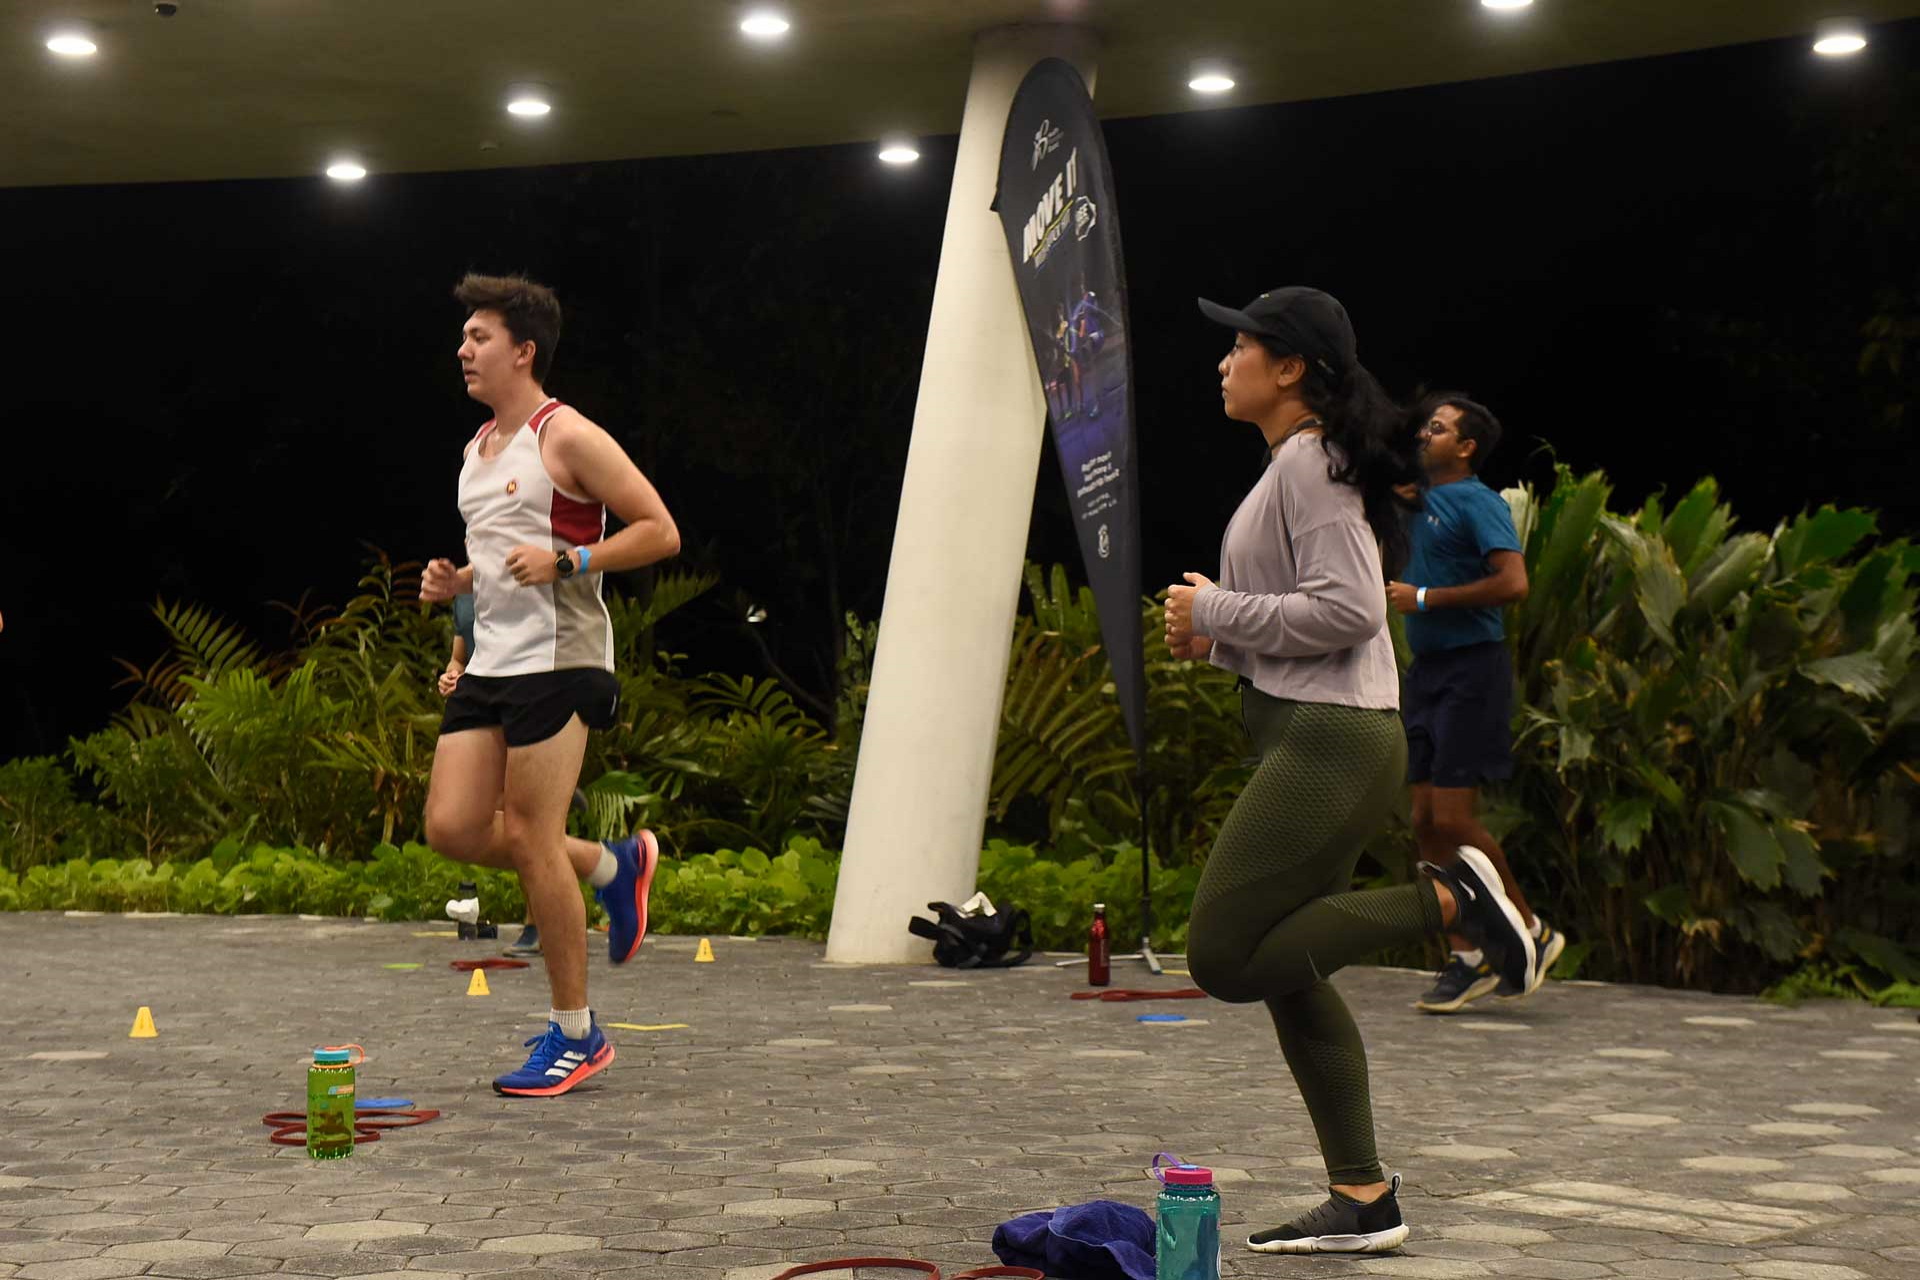 New NS Fit Programme Well-Received By NSmen